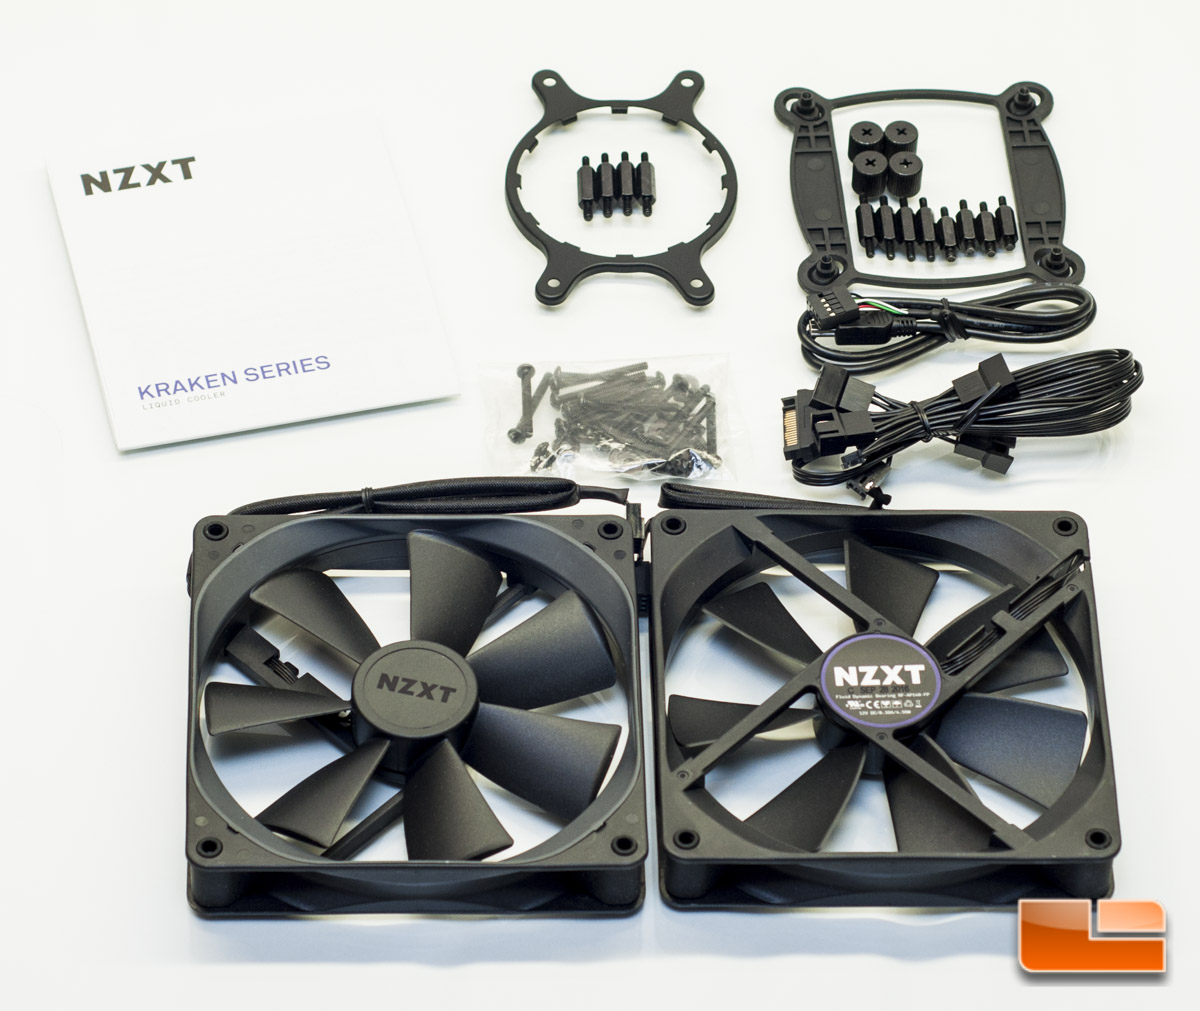 Nzxt X42 X52 And X62 Liquid Cpu Cooler Review Roundup Page 2 Of 8 Legit Reviews All New Kraken Packaging Quick Look